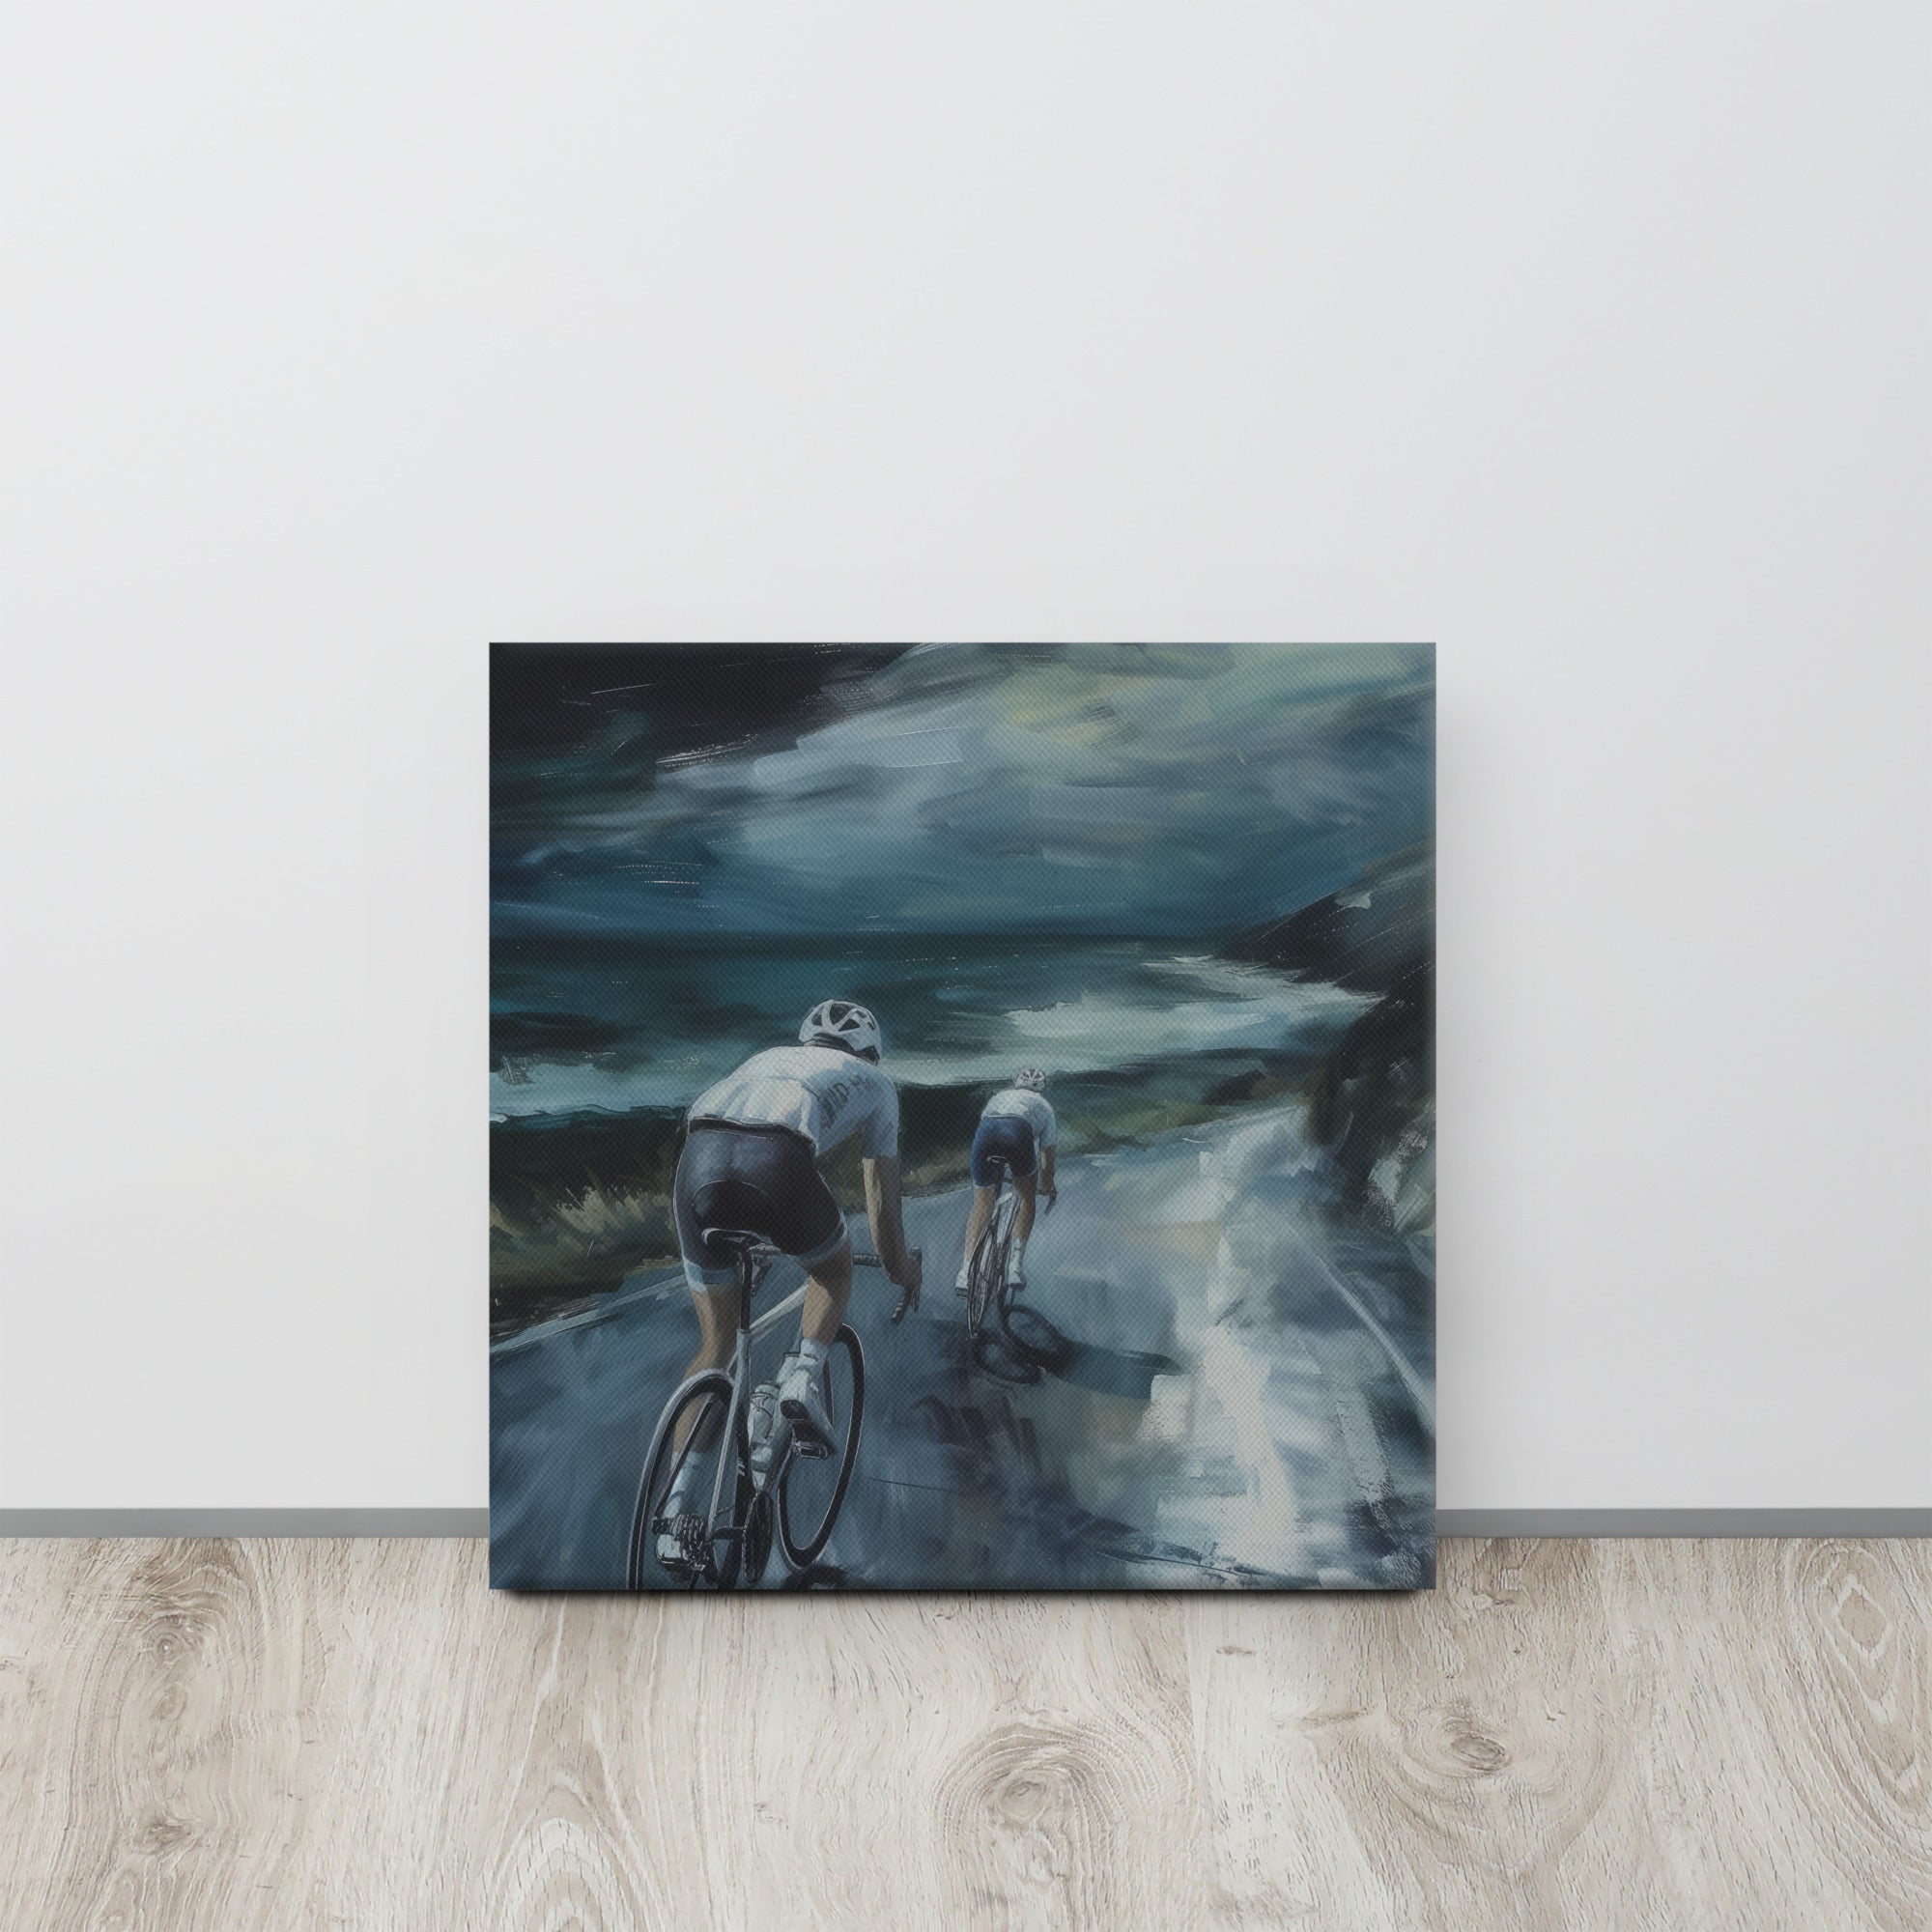 Ocean Gale: The Cyclists' Battle Canvas Print